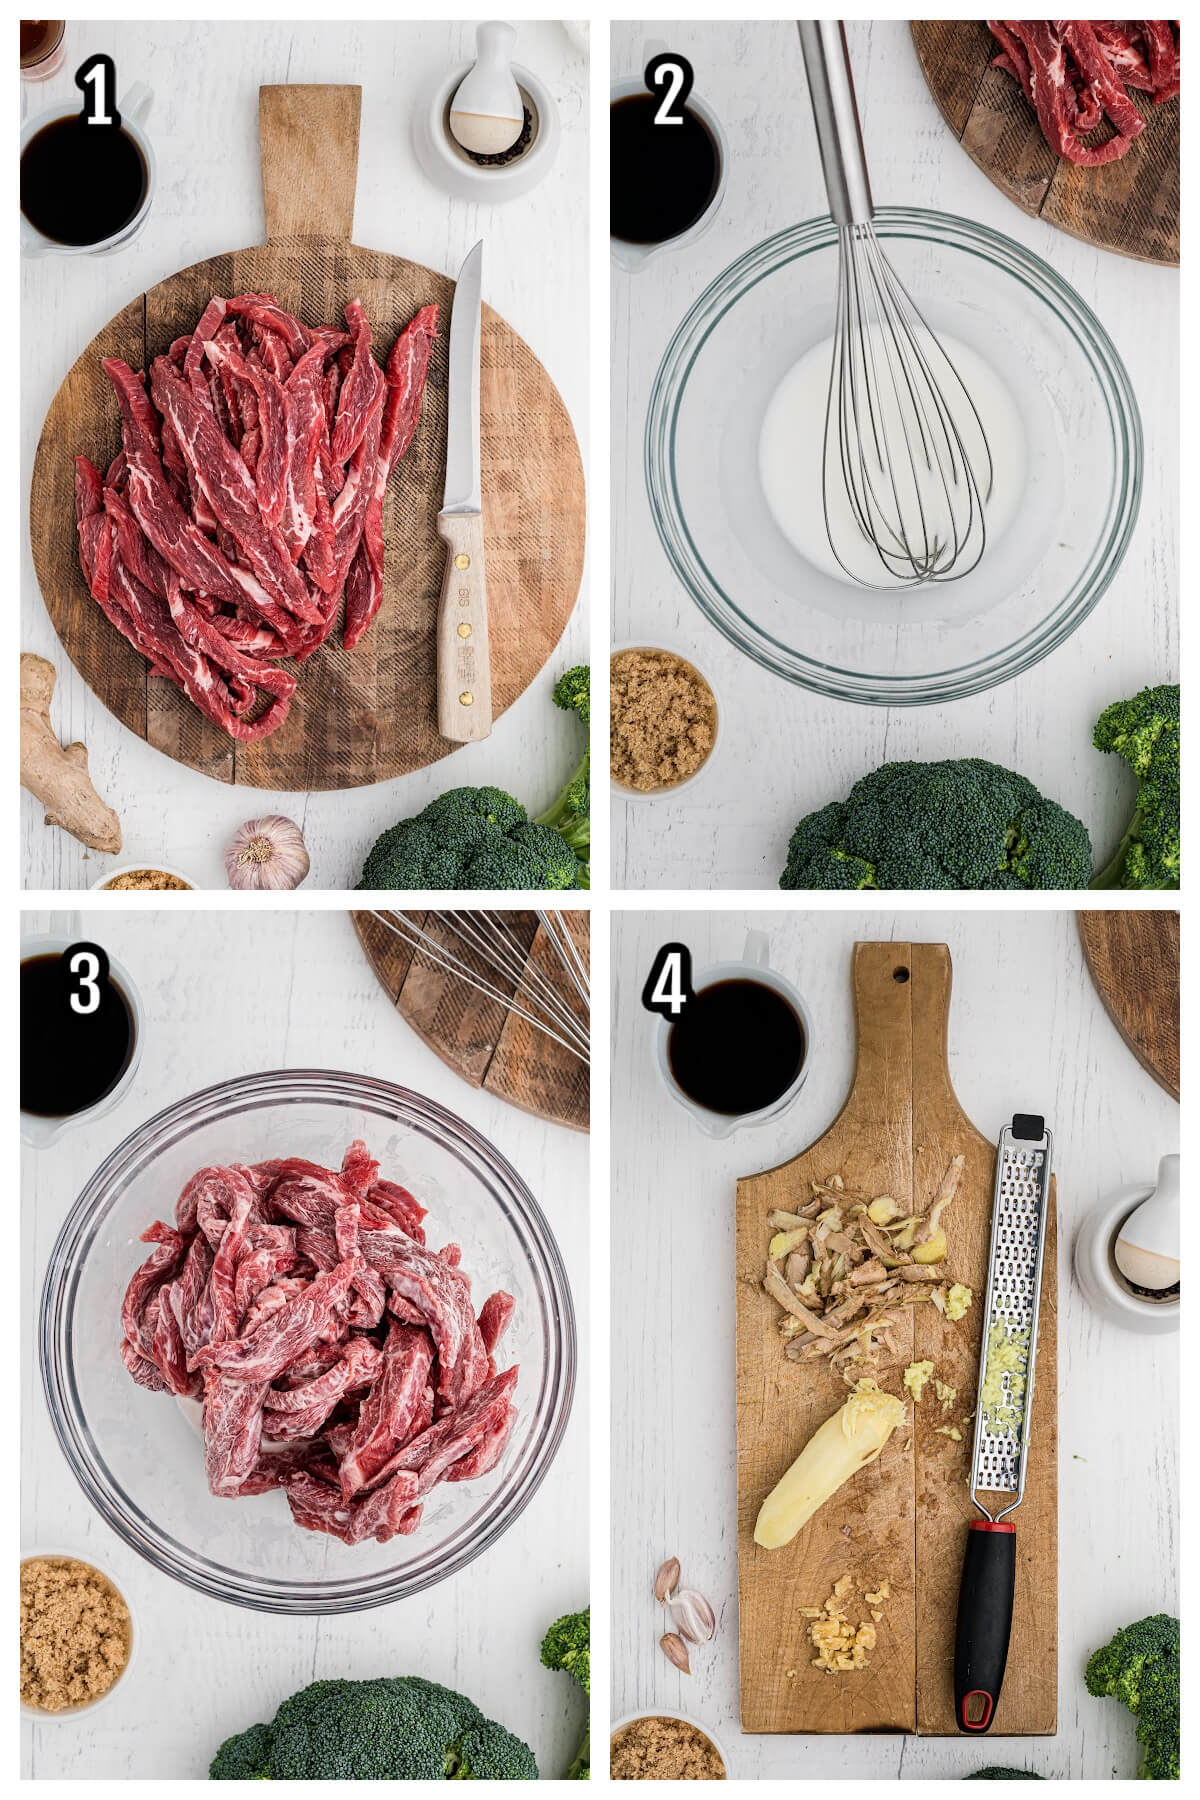 Steps 1-4 of Beef Broccoli Recipe instructions. 